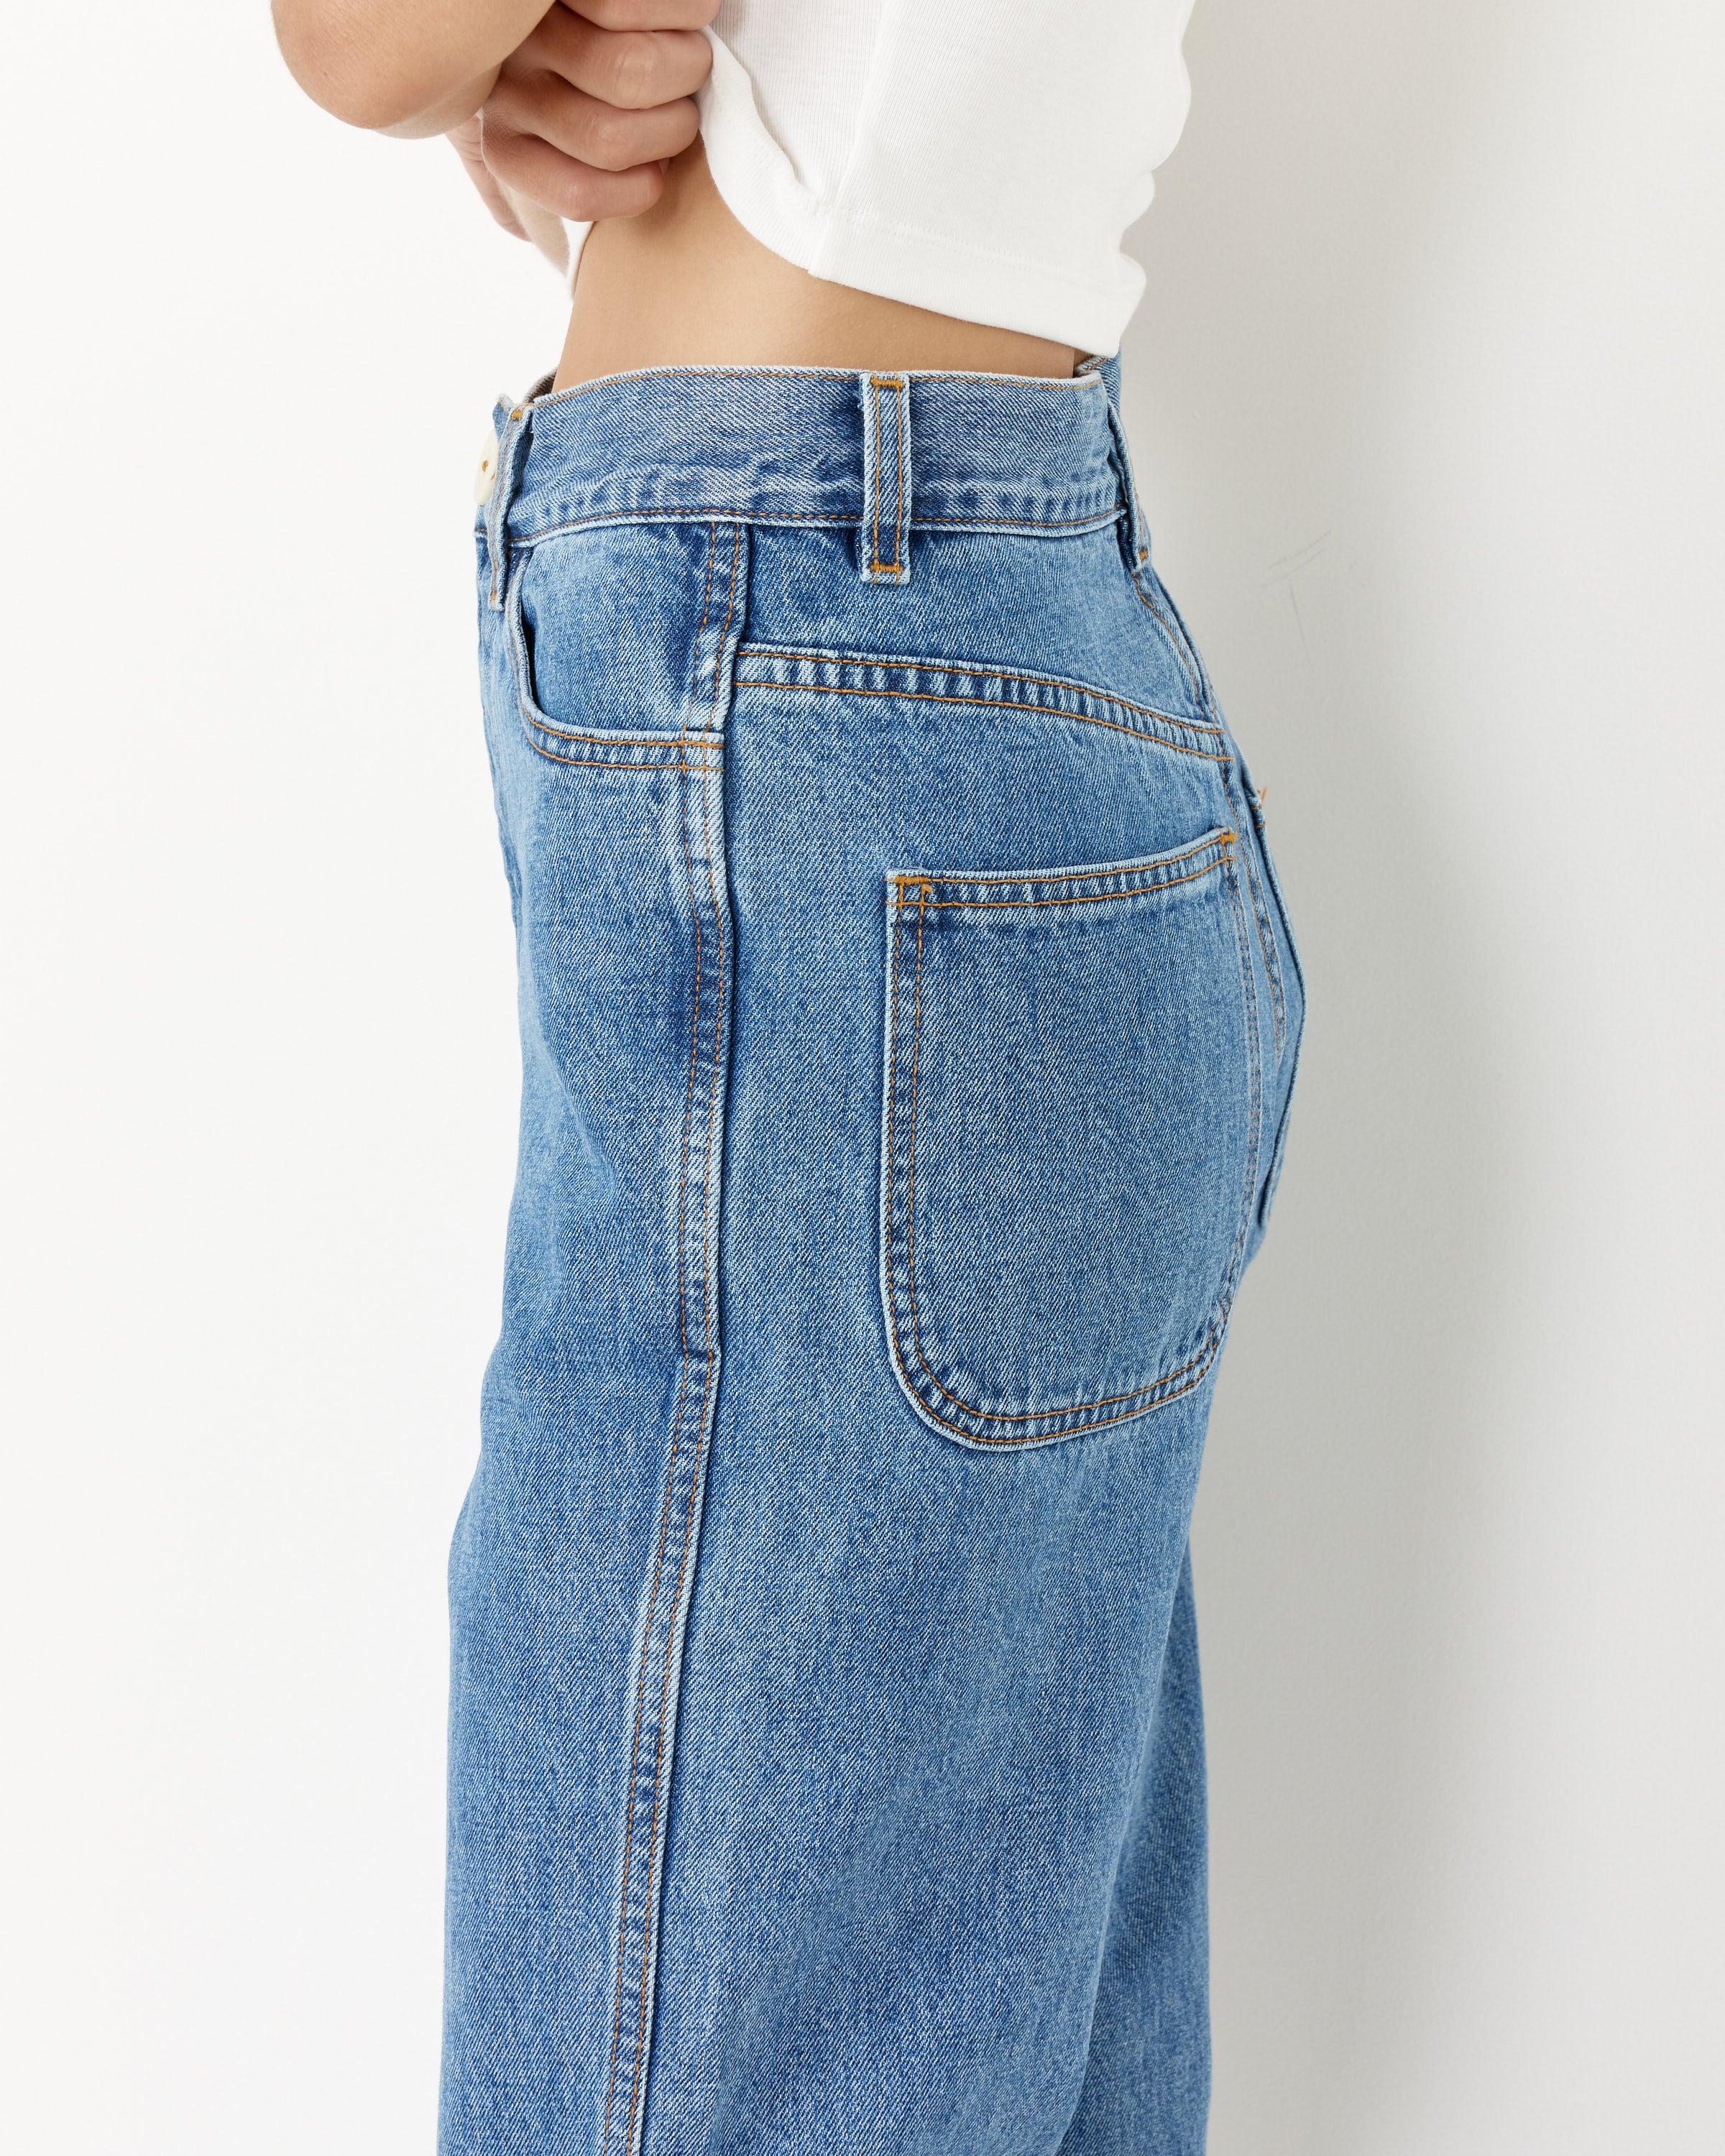 The 225 Pant in Cowboy Blue